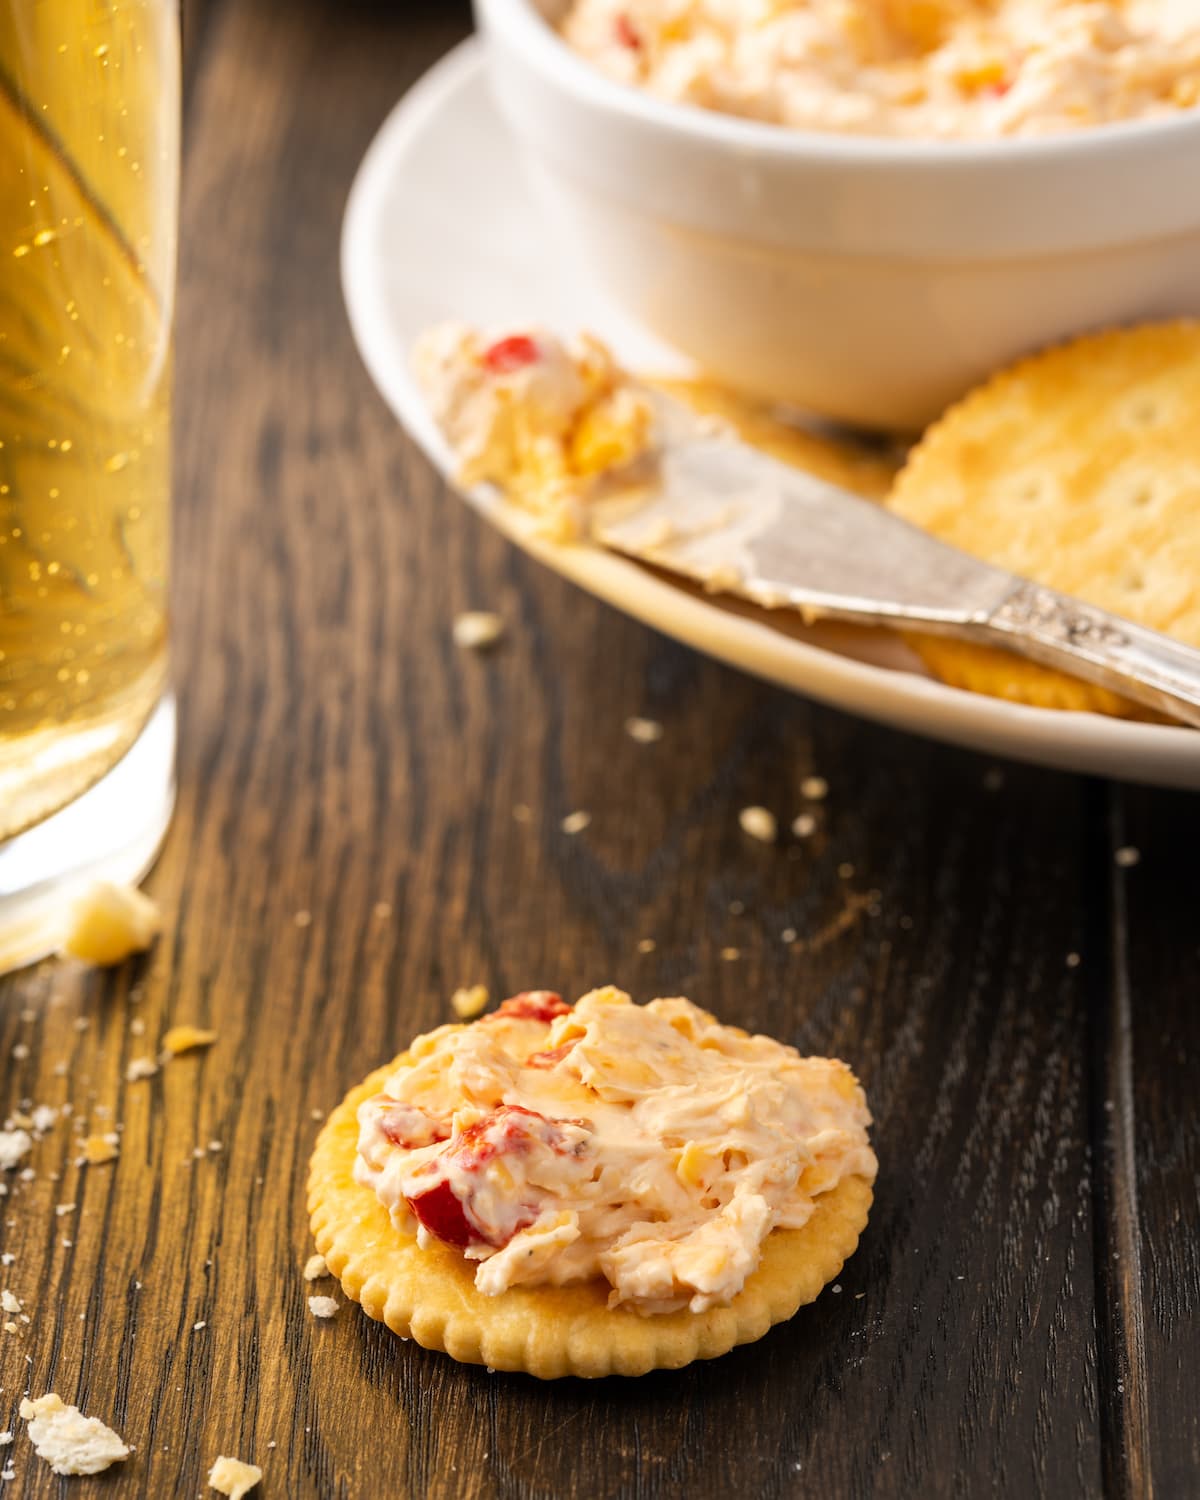 A cracker topped with pimento cheese on a tabletop with a plate of crackers and pimento cheese in the background.